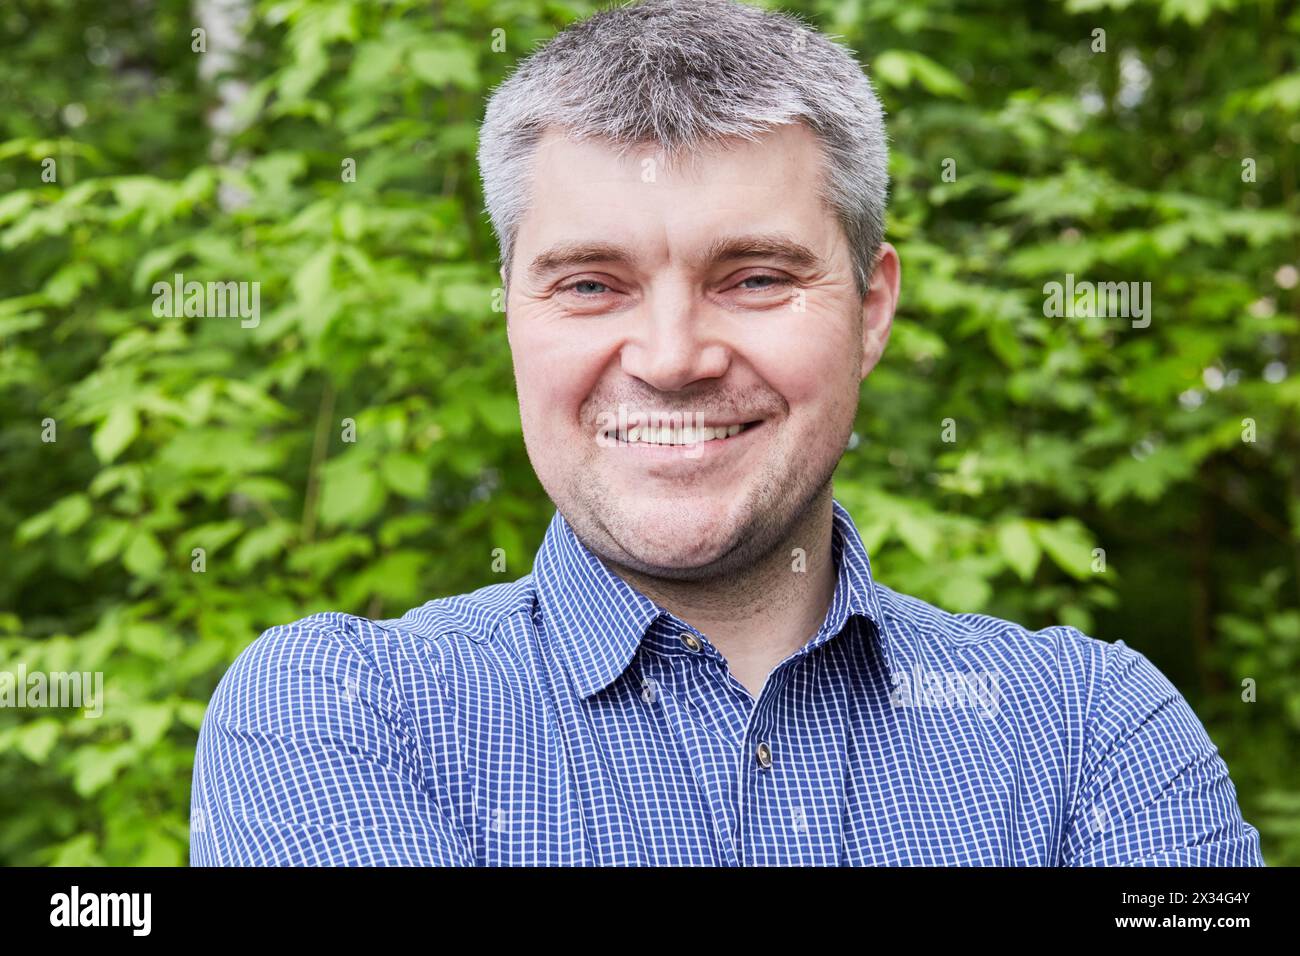 Humeral portrait of grey-haired smiling man in checkered shirt at summer park. Stock Photo